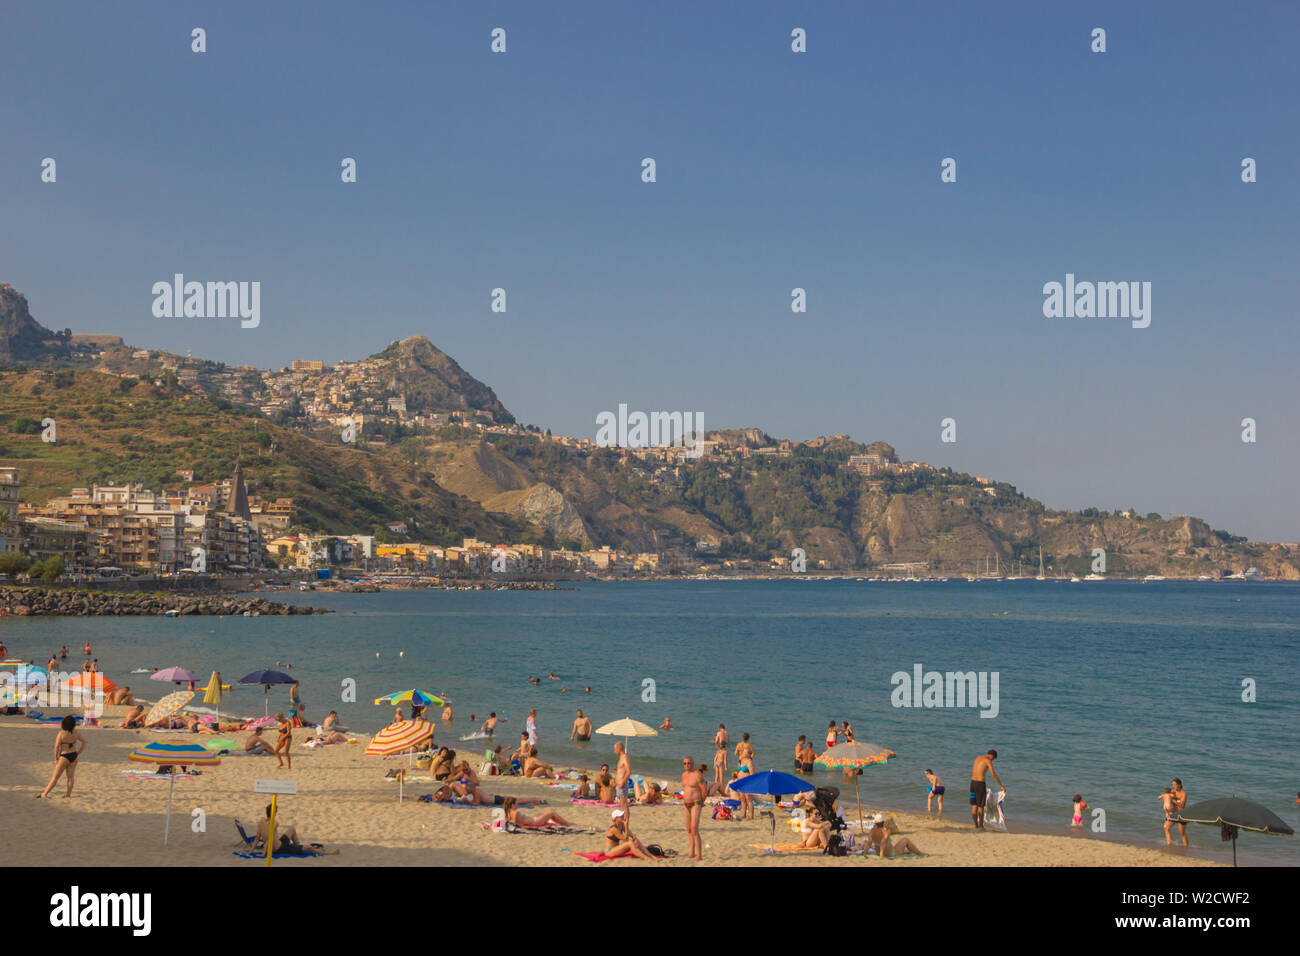 Giardini Naxos Sicily Italy 2019 scenic view of the coastline and beach with people enjoying the vacation time in Summer Stock Photo